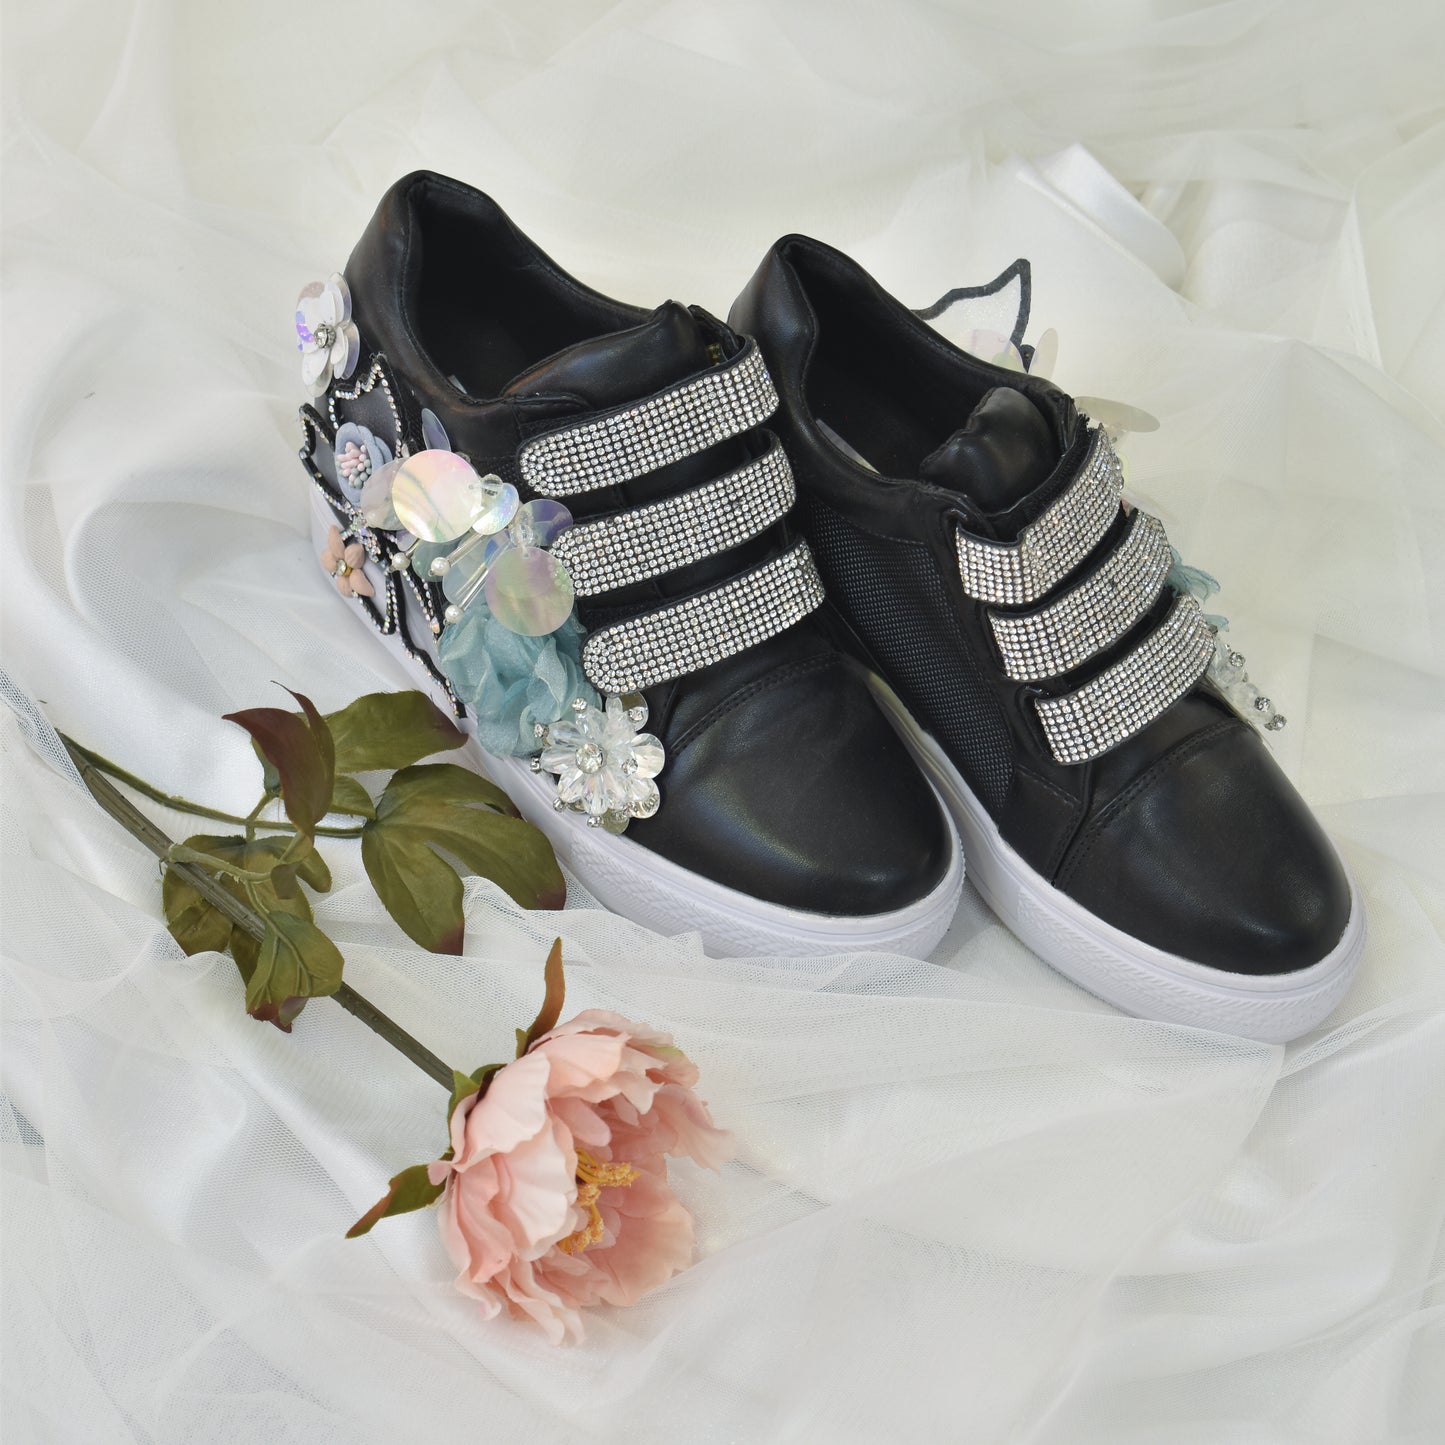 Black Butterfly Shoes